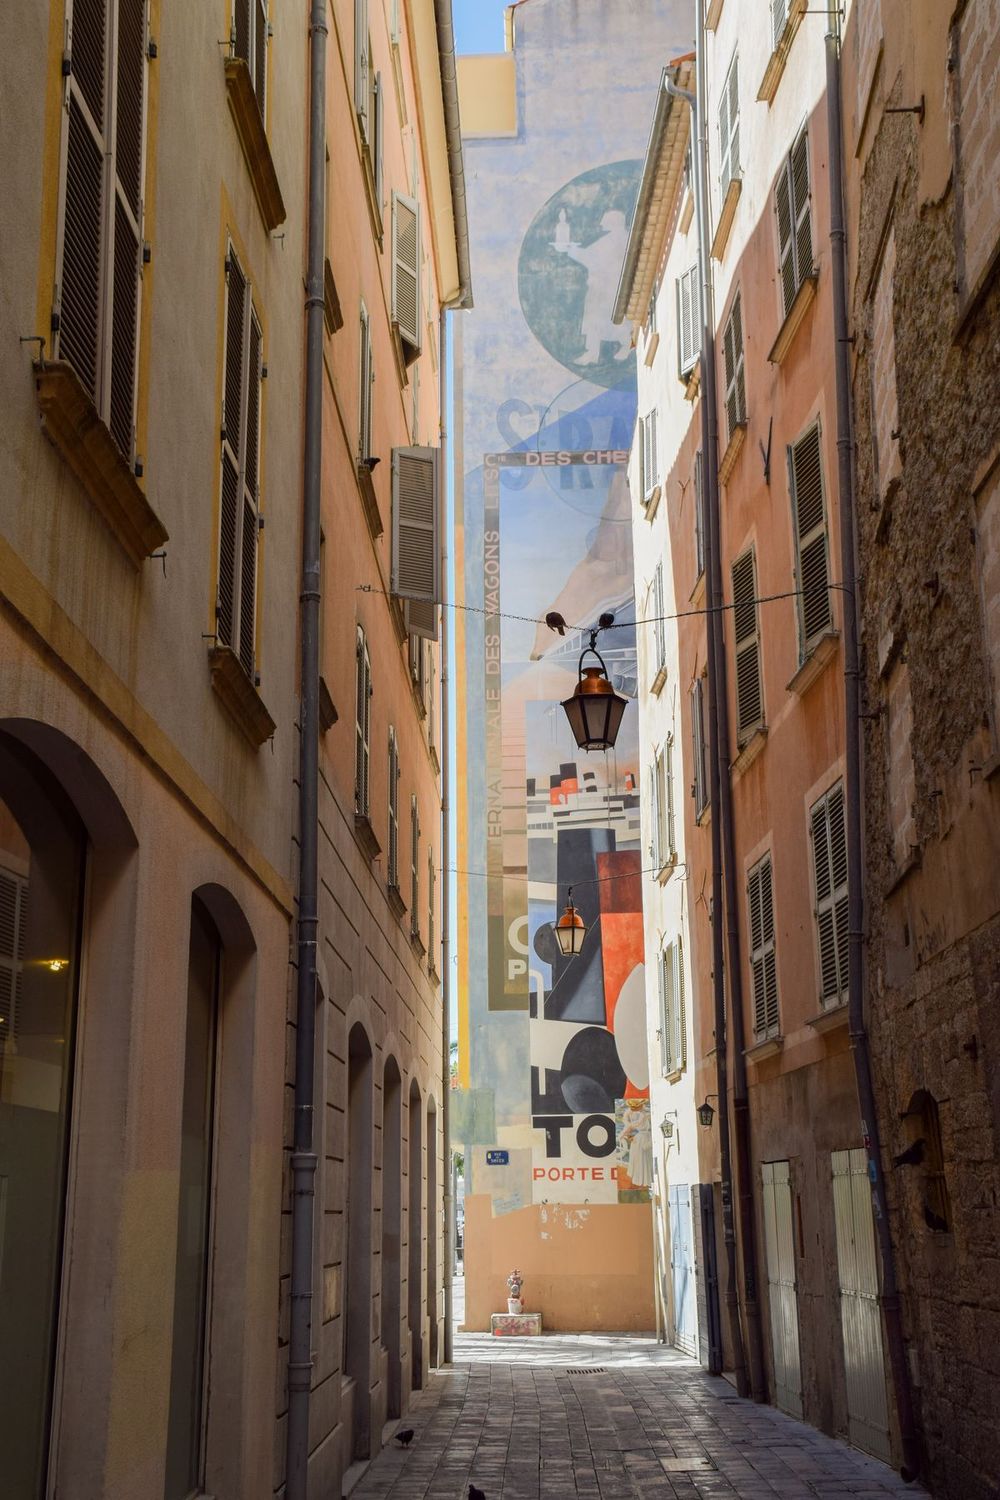 Enormous wall mural in Old Town Toulon, France